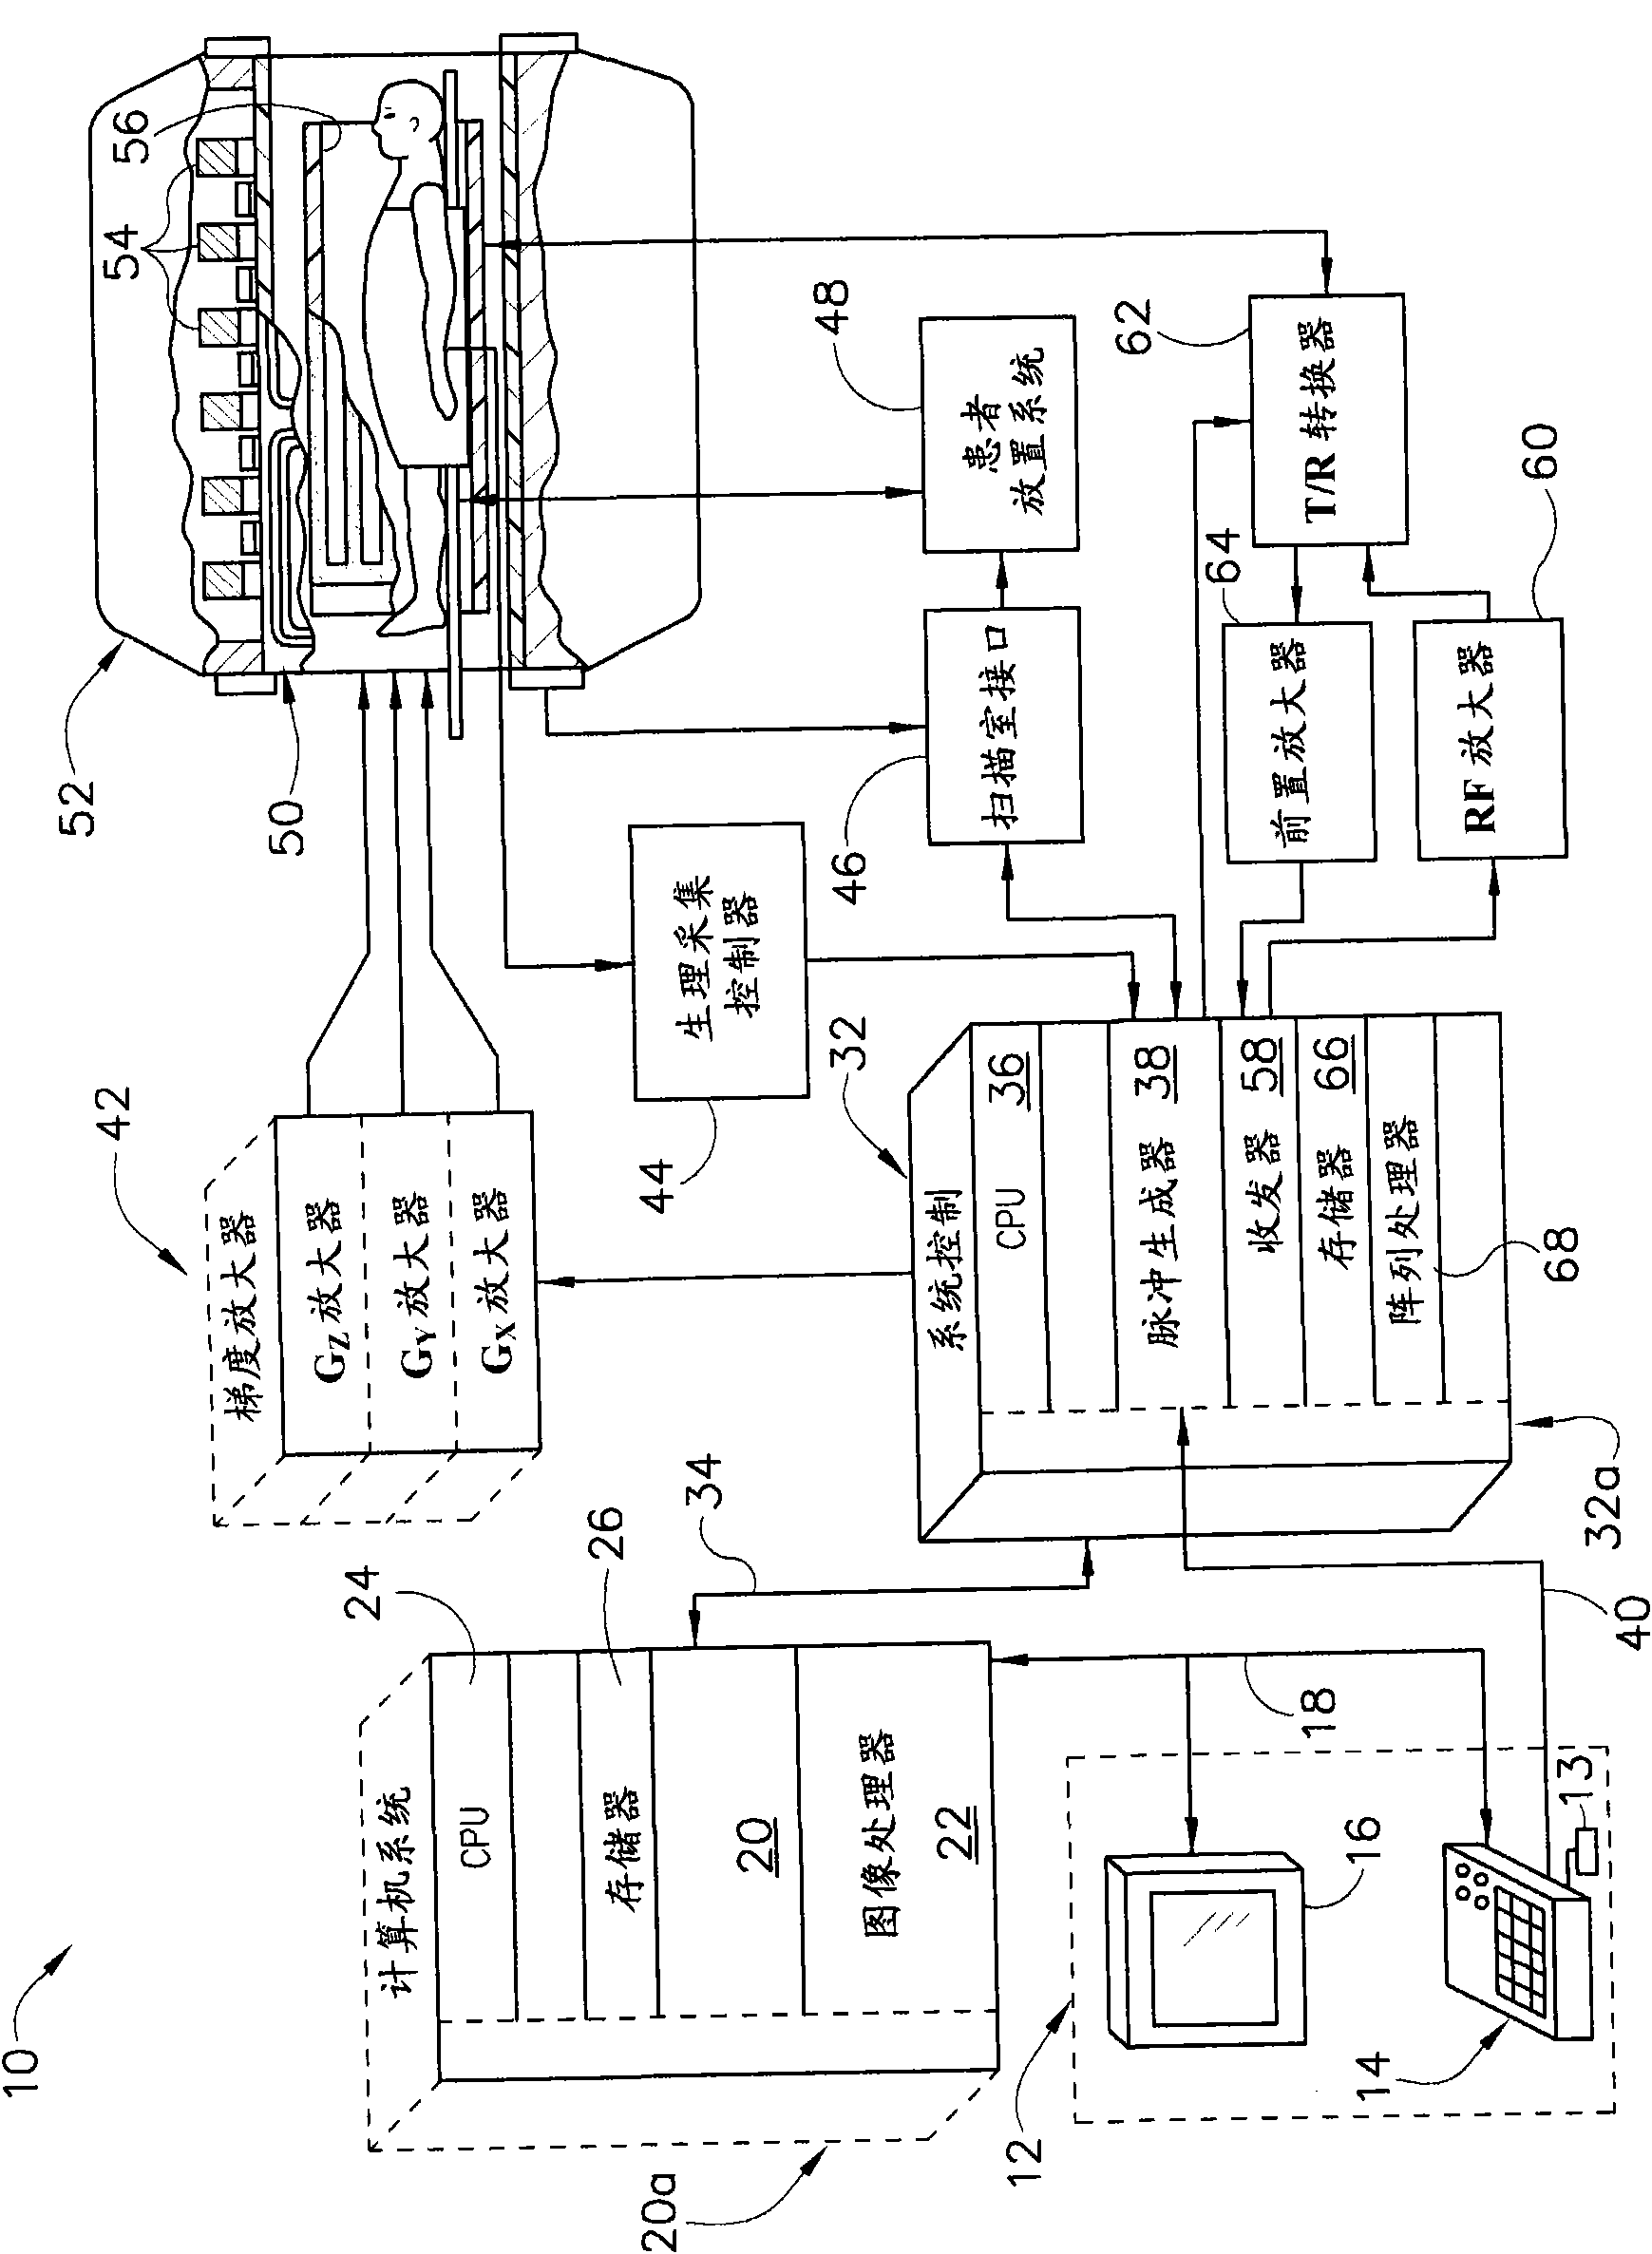 System, method, and apparatus for magnetic resonance RF-field measurement